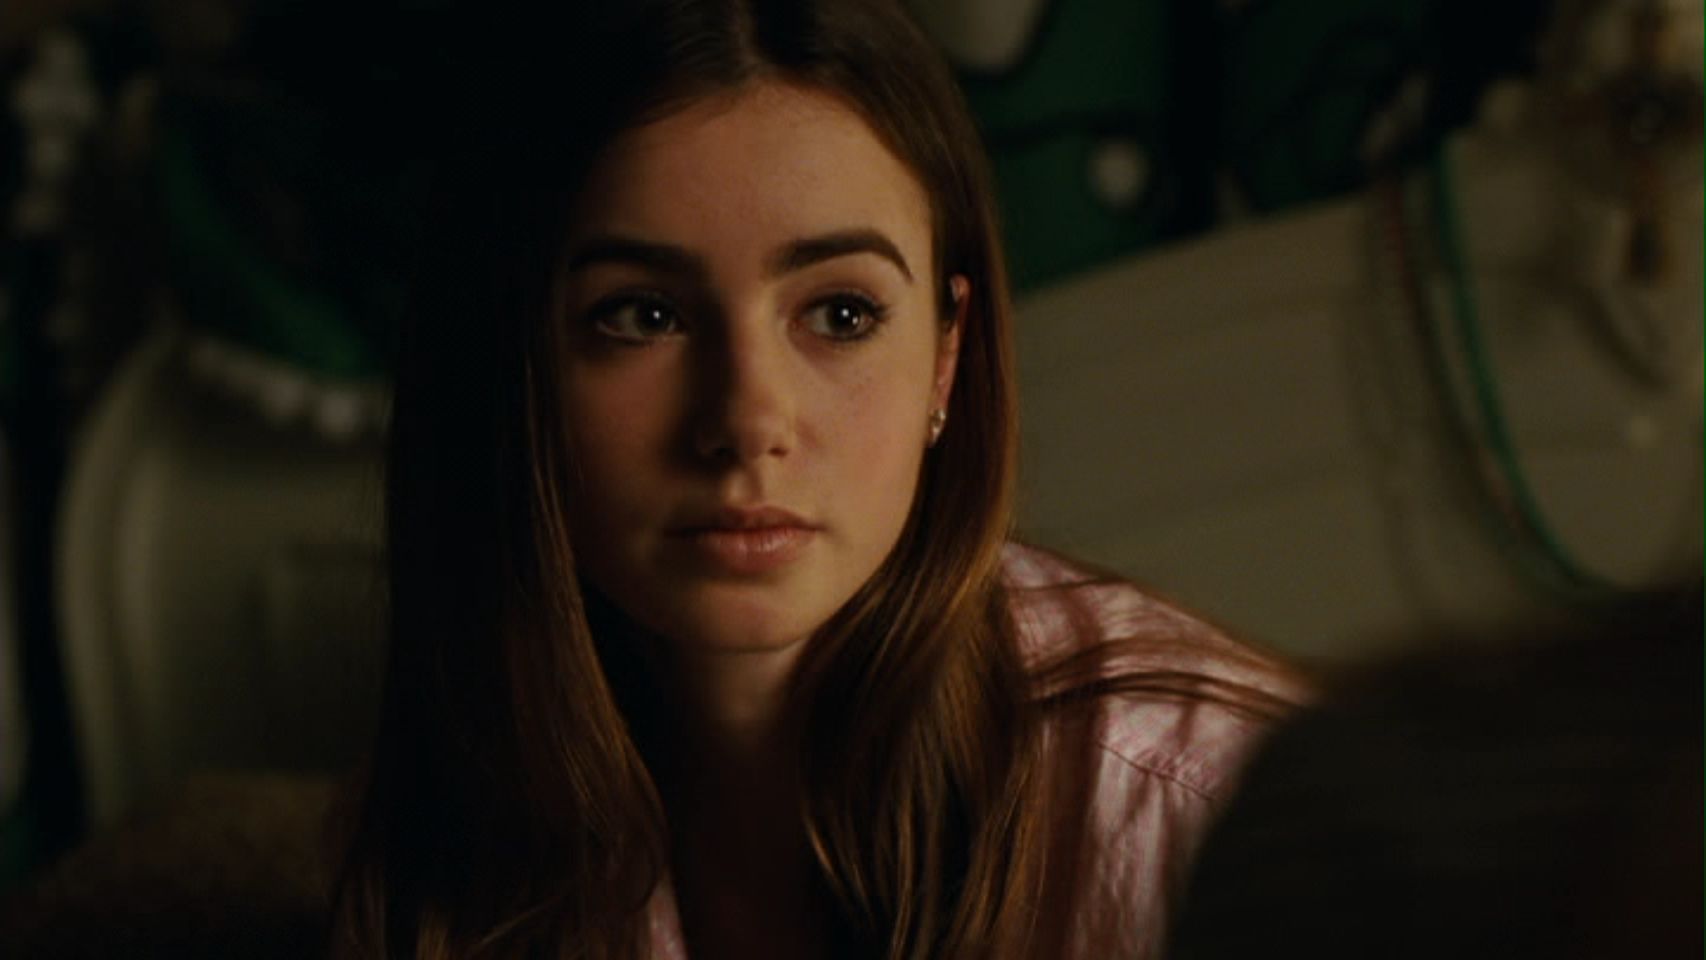 The Blind Side - Lily Collins Image (21307003) - Fanpop